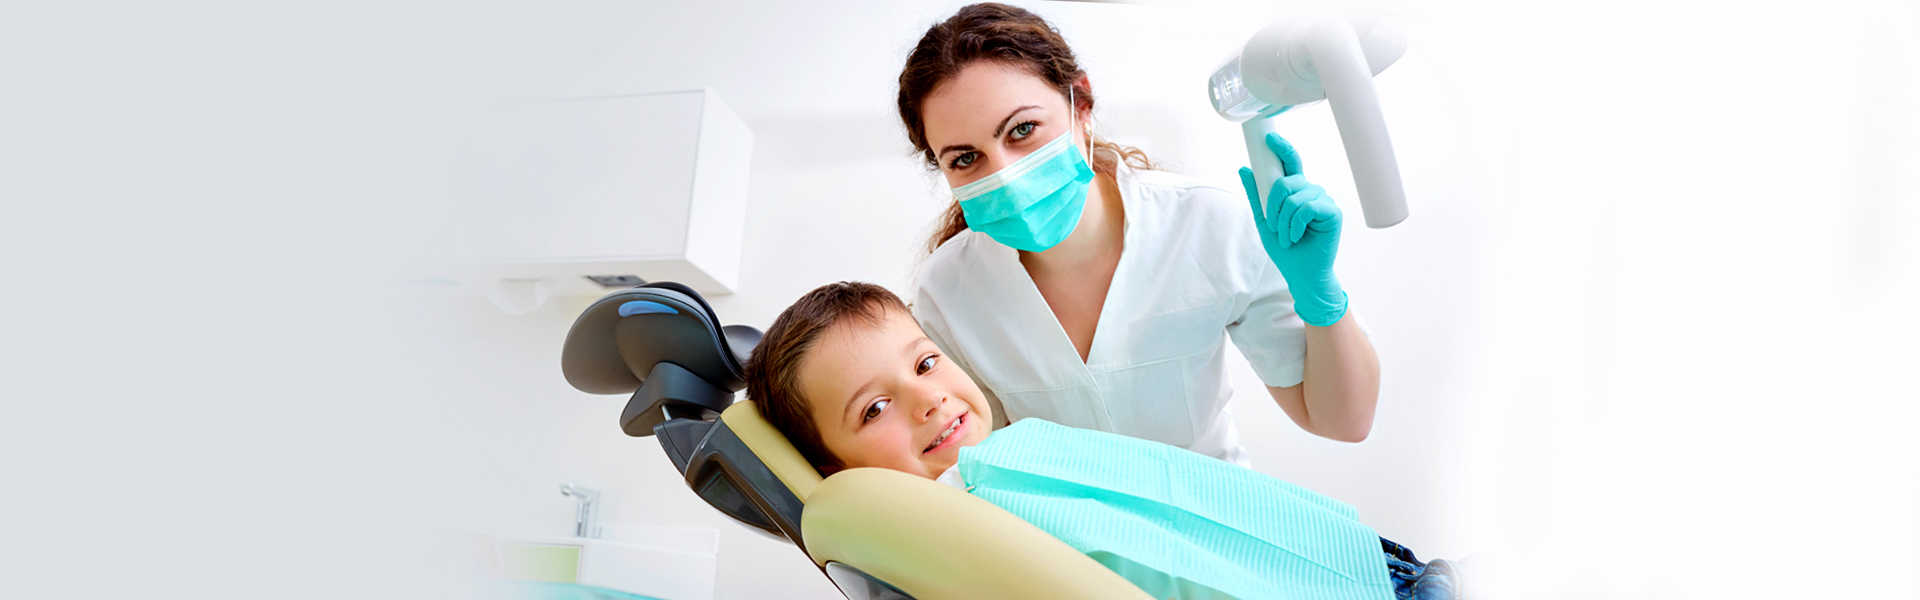 Is Root Canal Treatment Necessary for Kids?